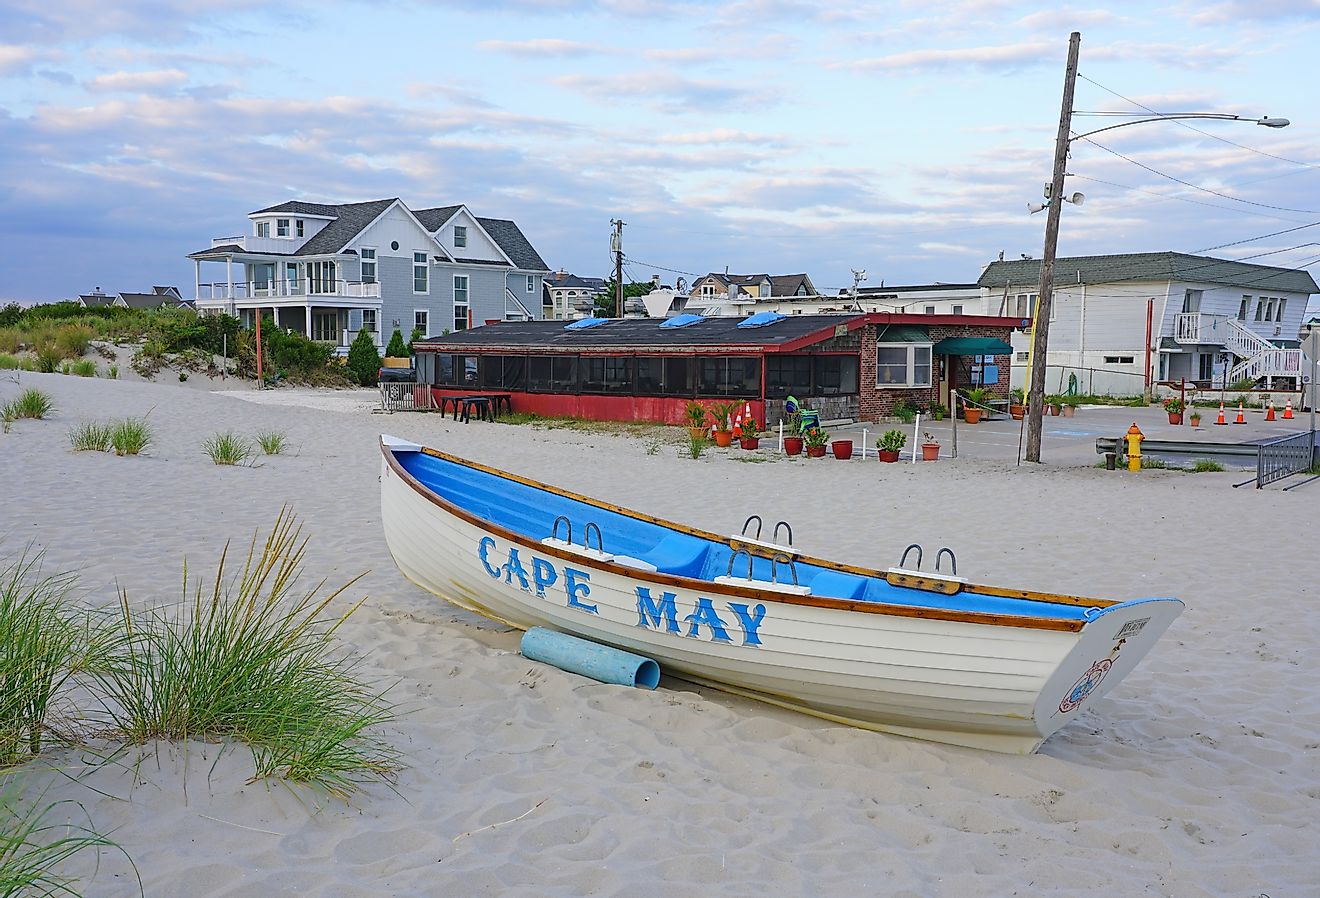 Cape May sign on the beach in Cape May, New Jersey. Image credit EQRoy via Shutterstock